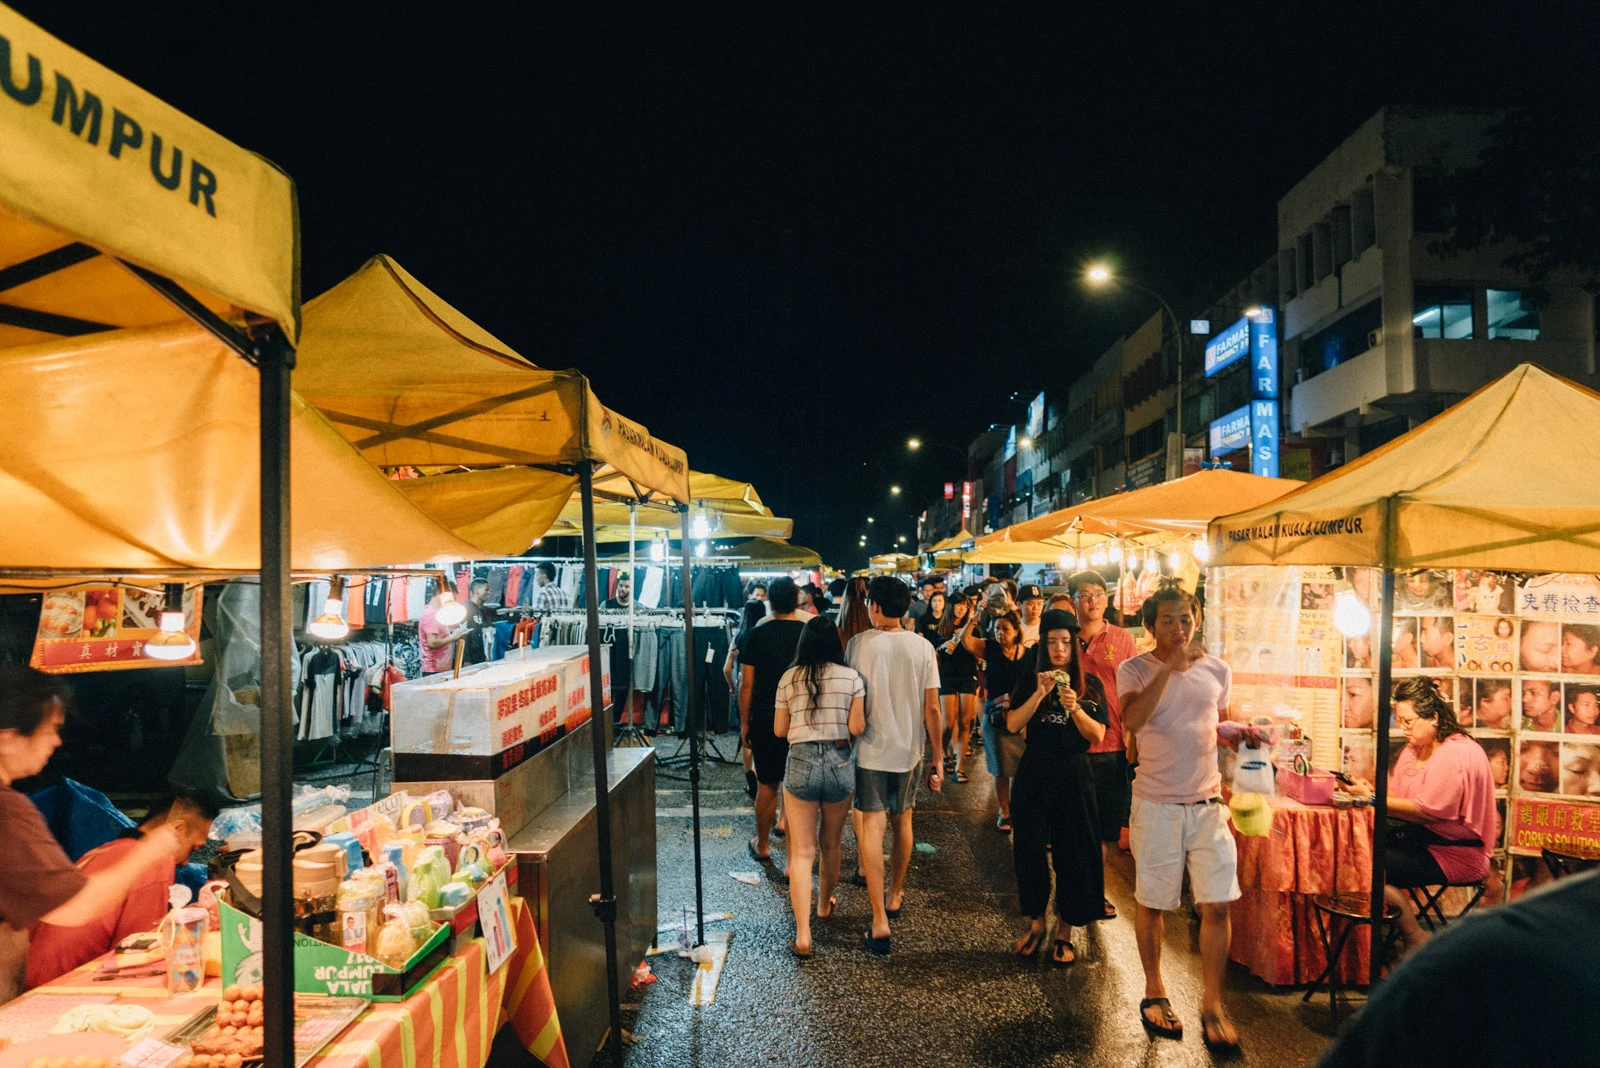 A night market in taman connaught, kl